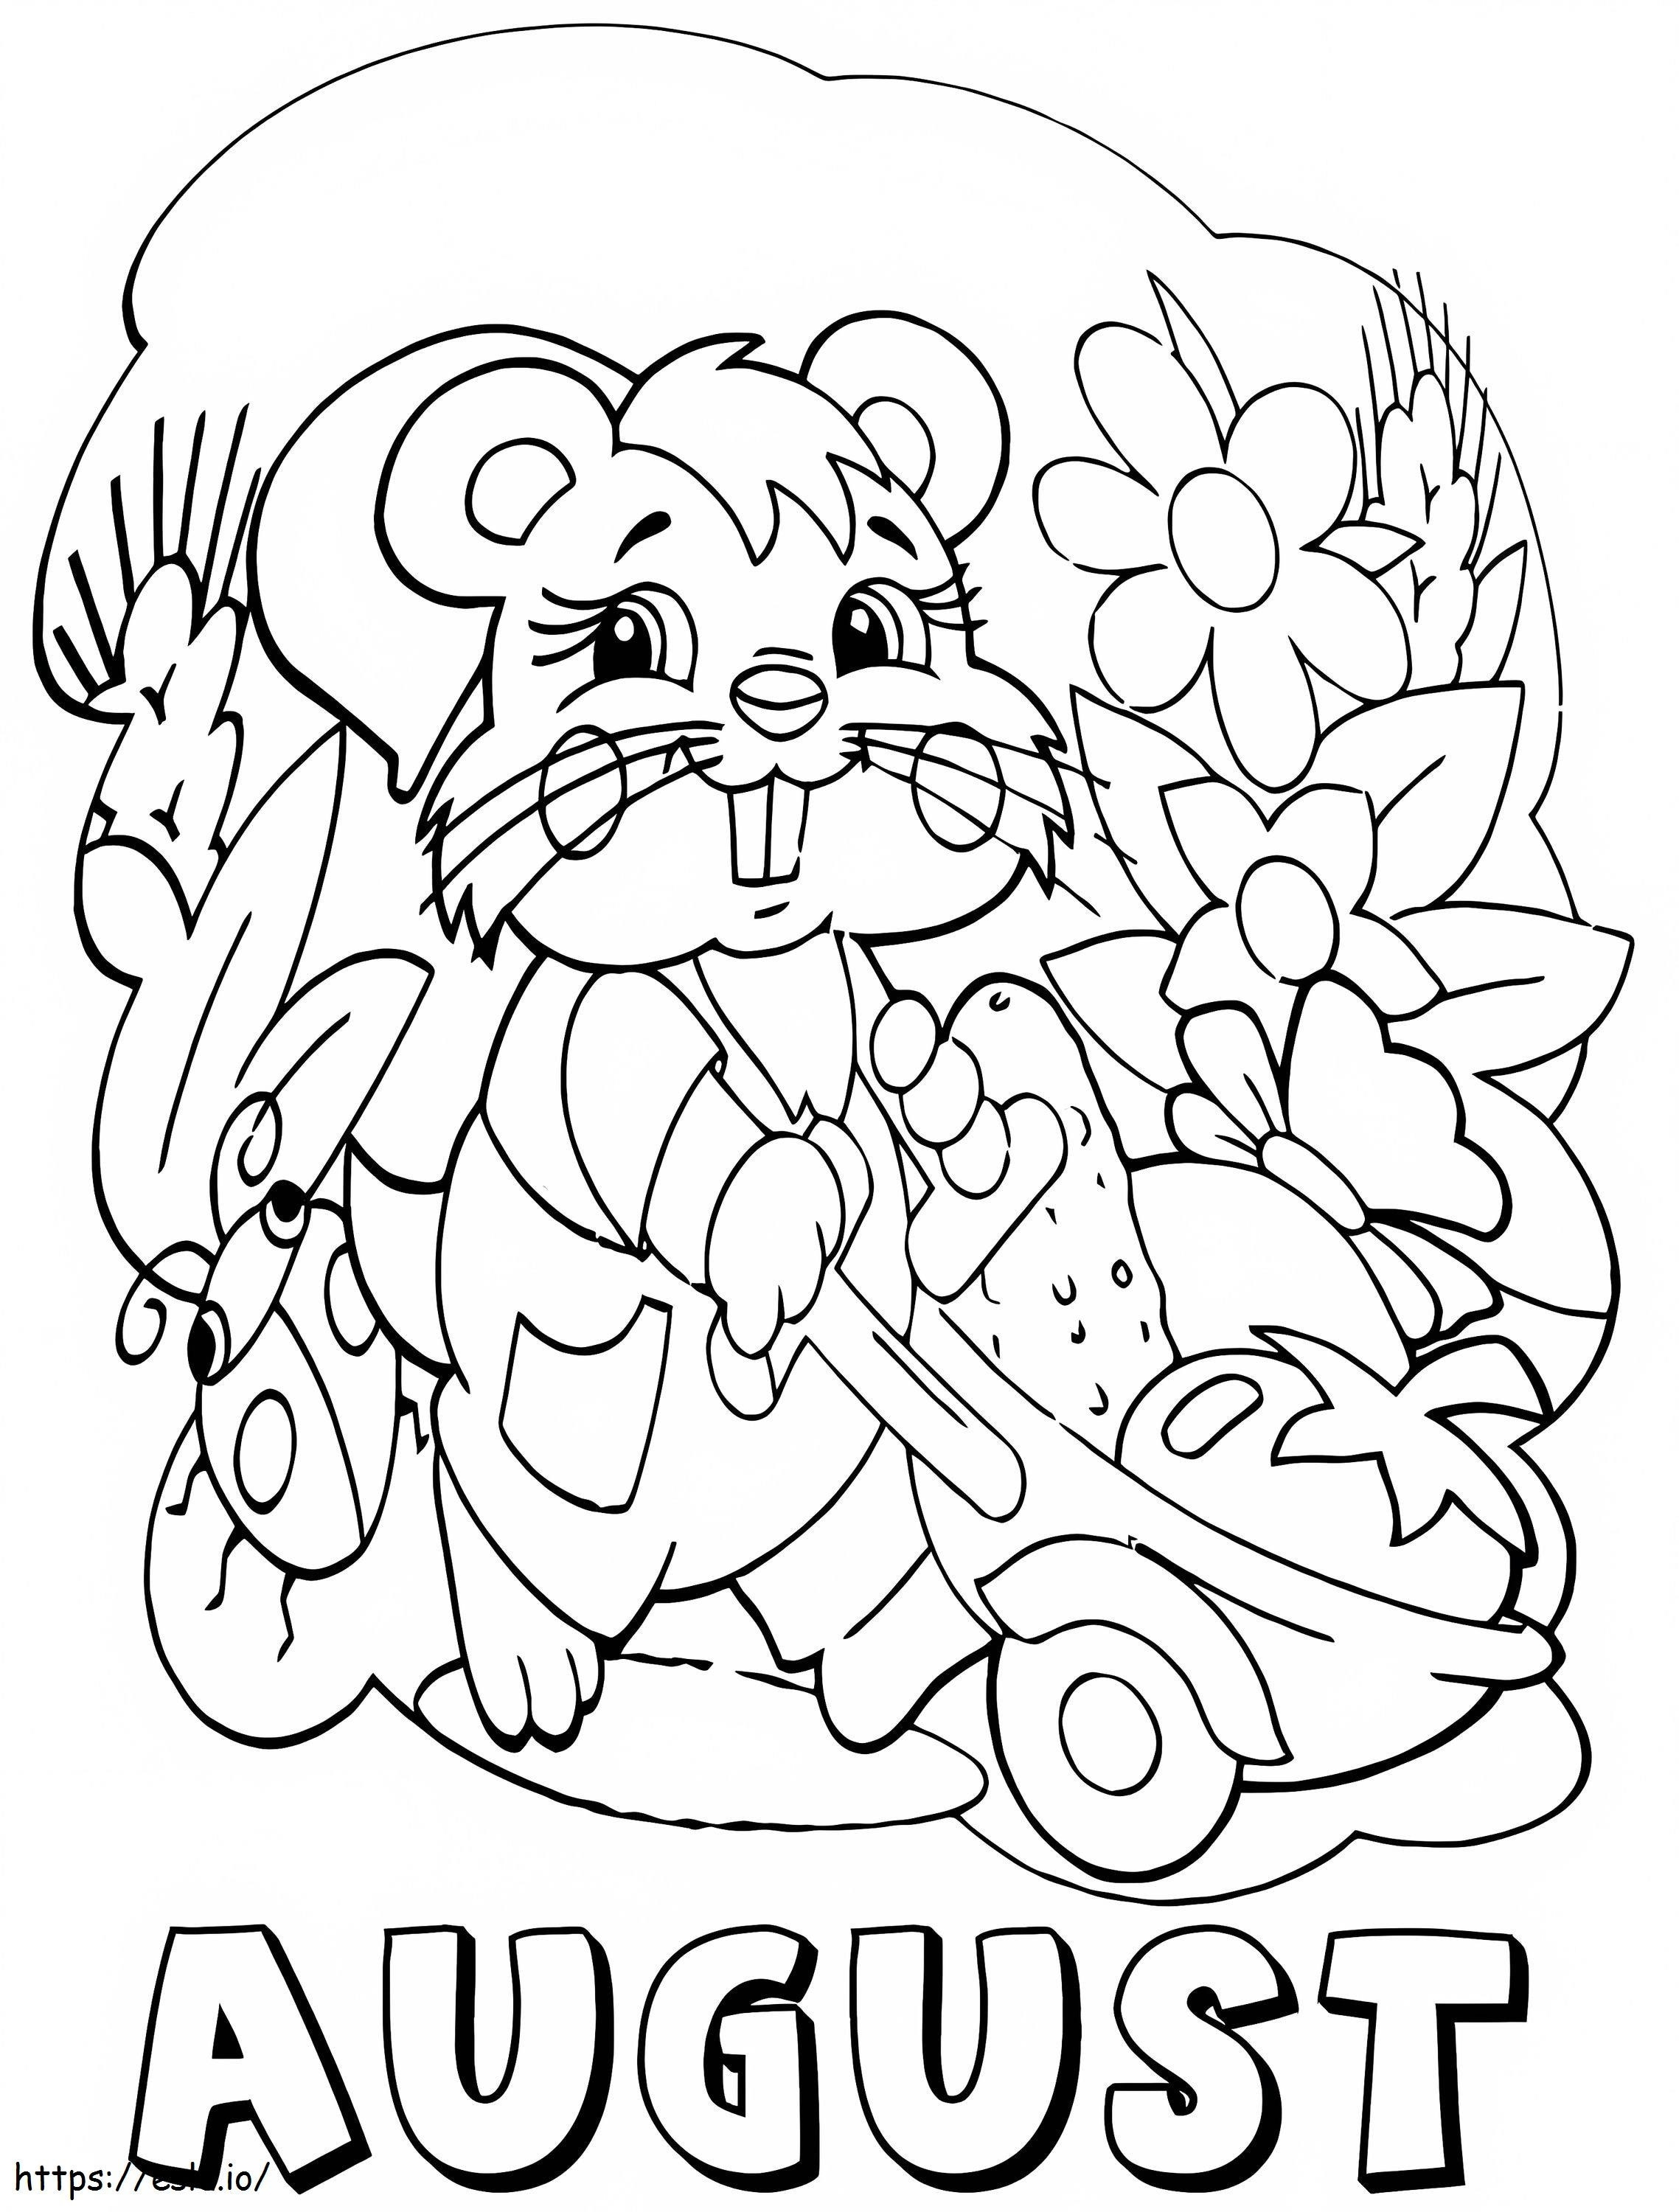 August 3 coloring page